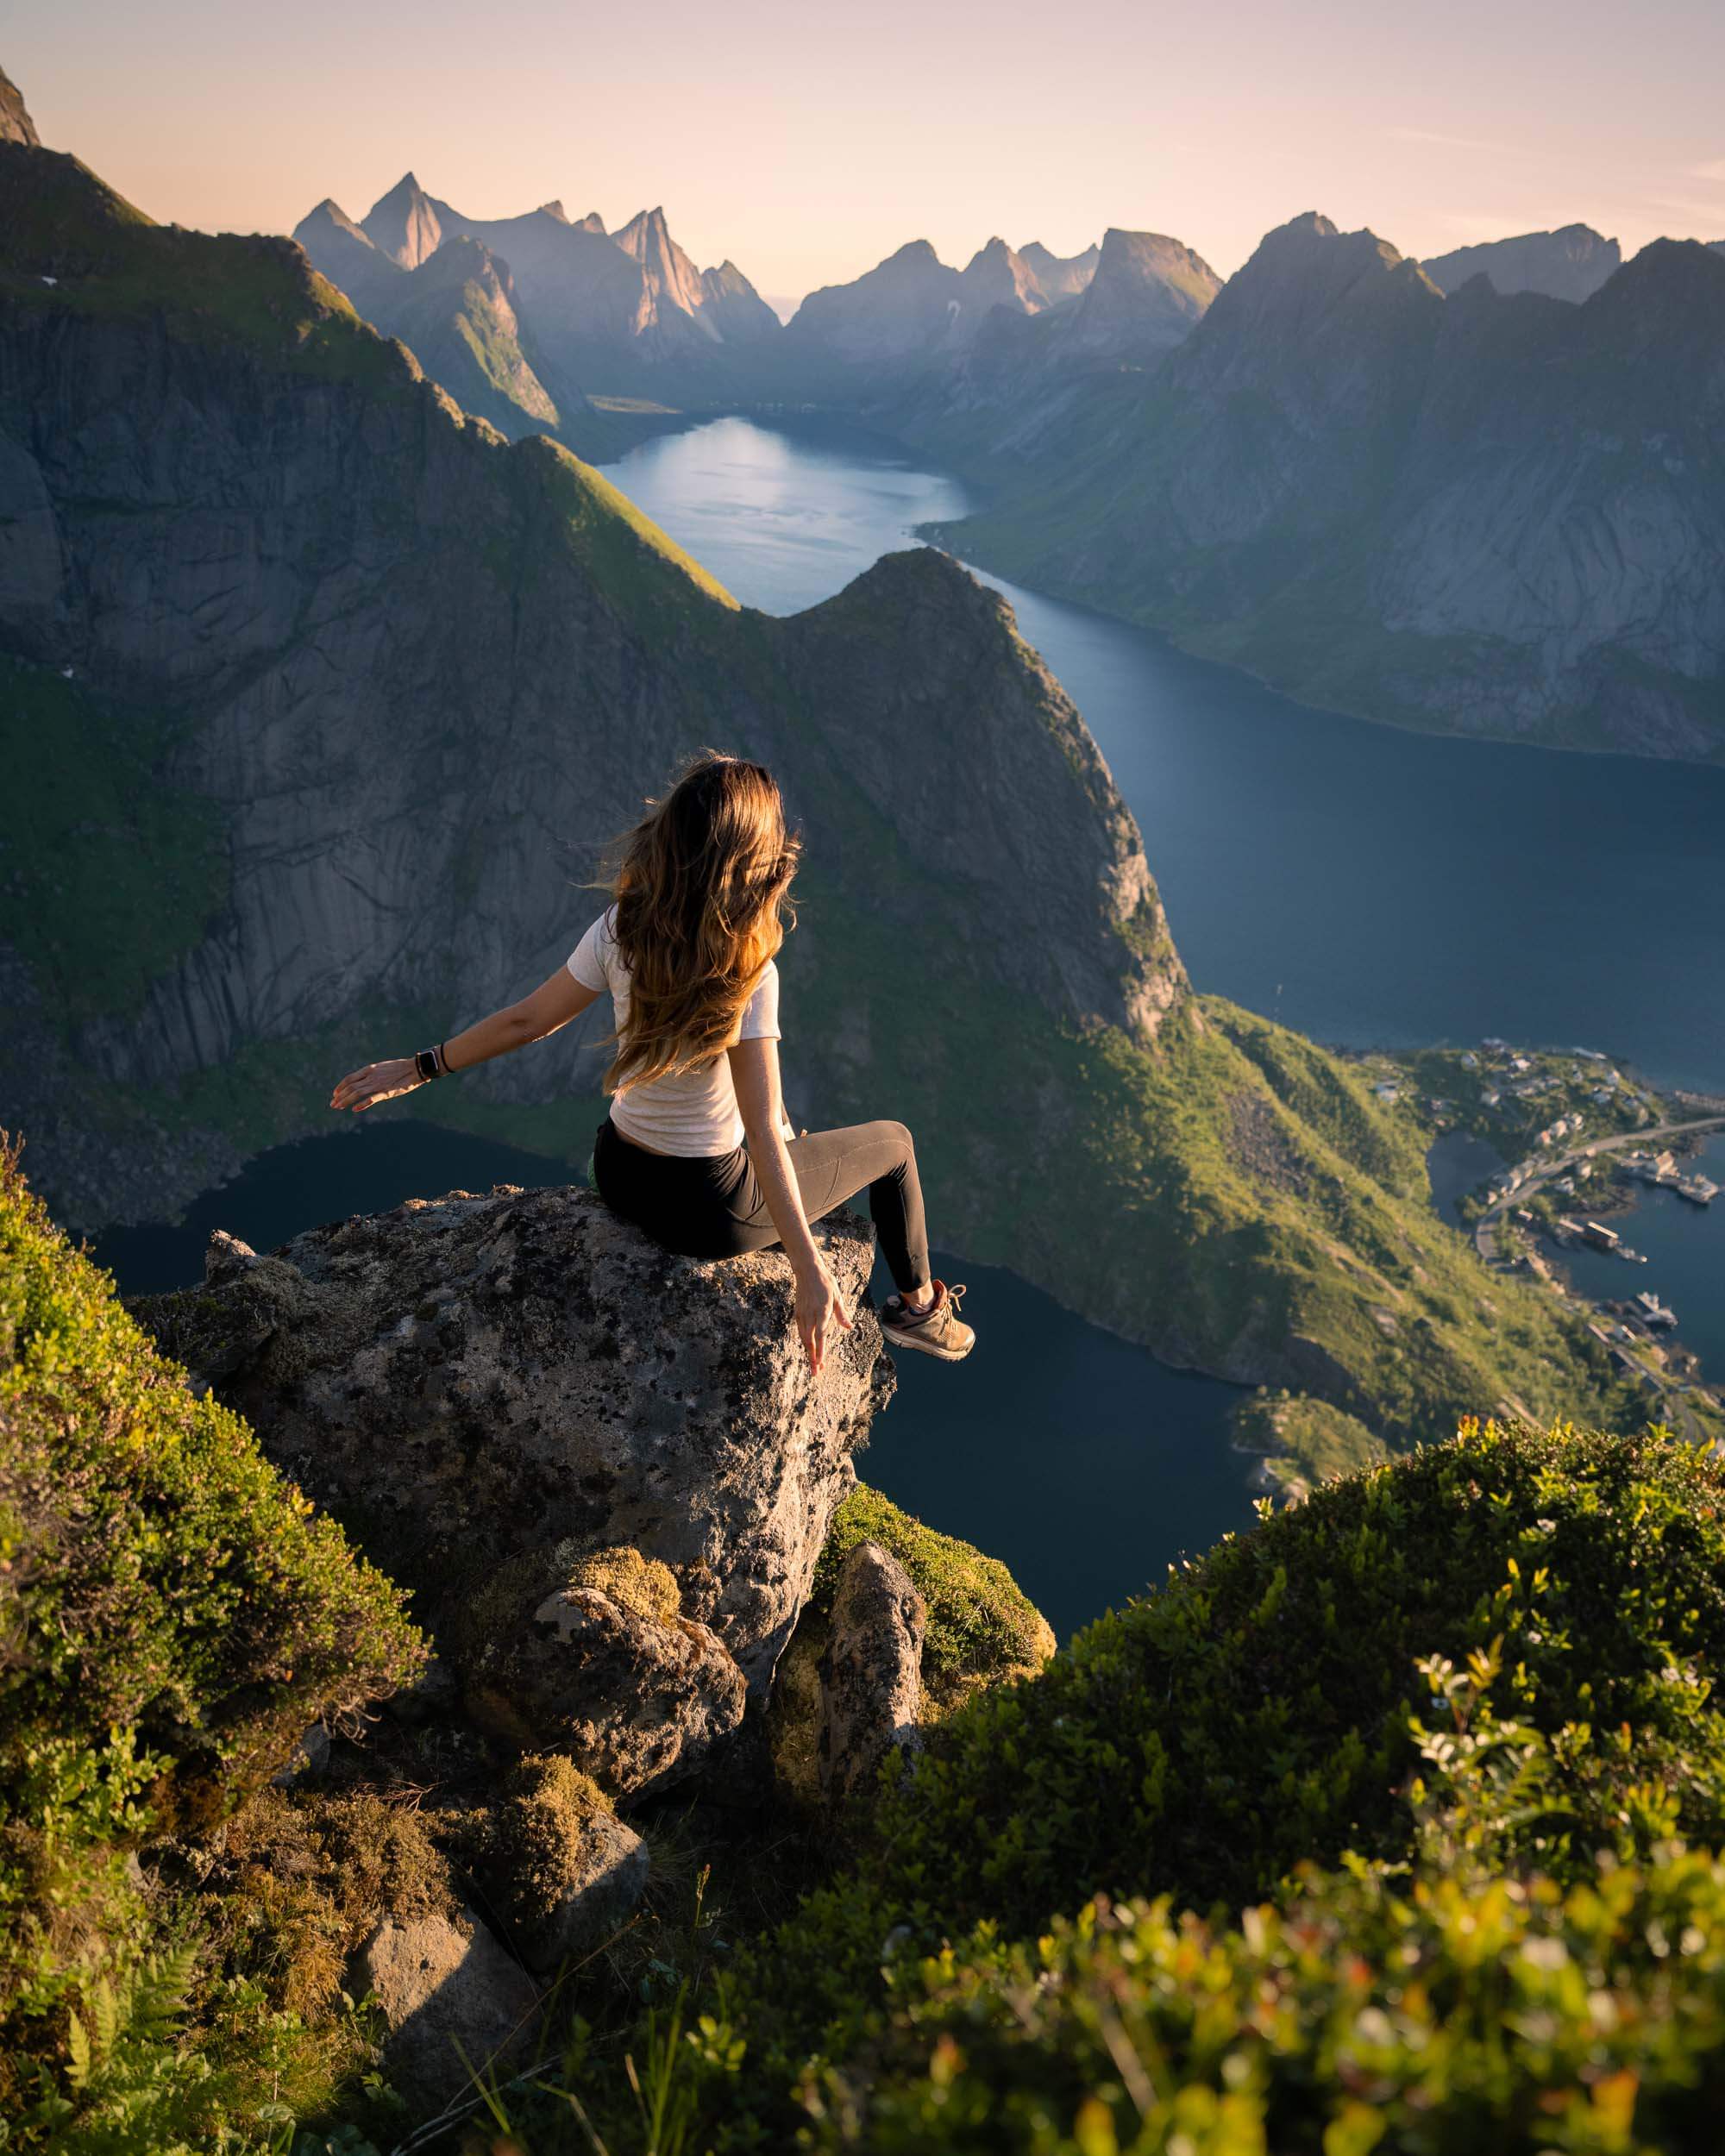 jess wandering sitting with arms outstretched with the view of the mountains and water in the background on the reinebringen hike, one of the best hikes in norway